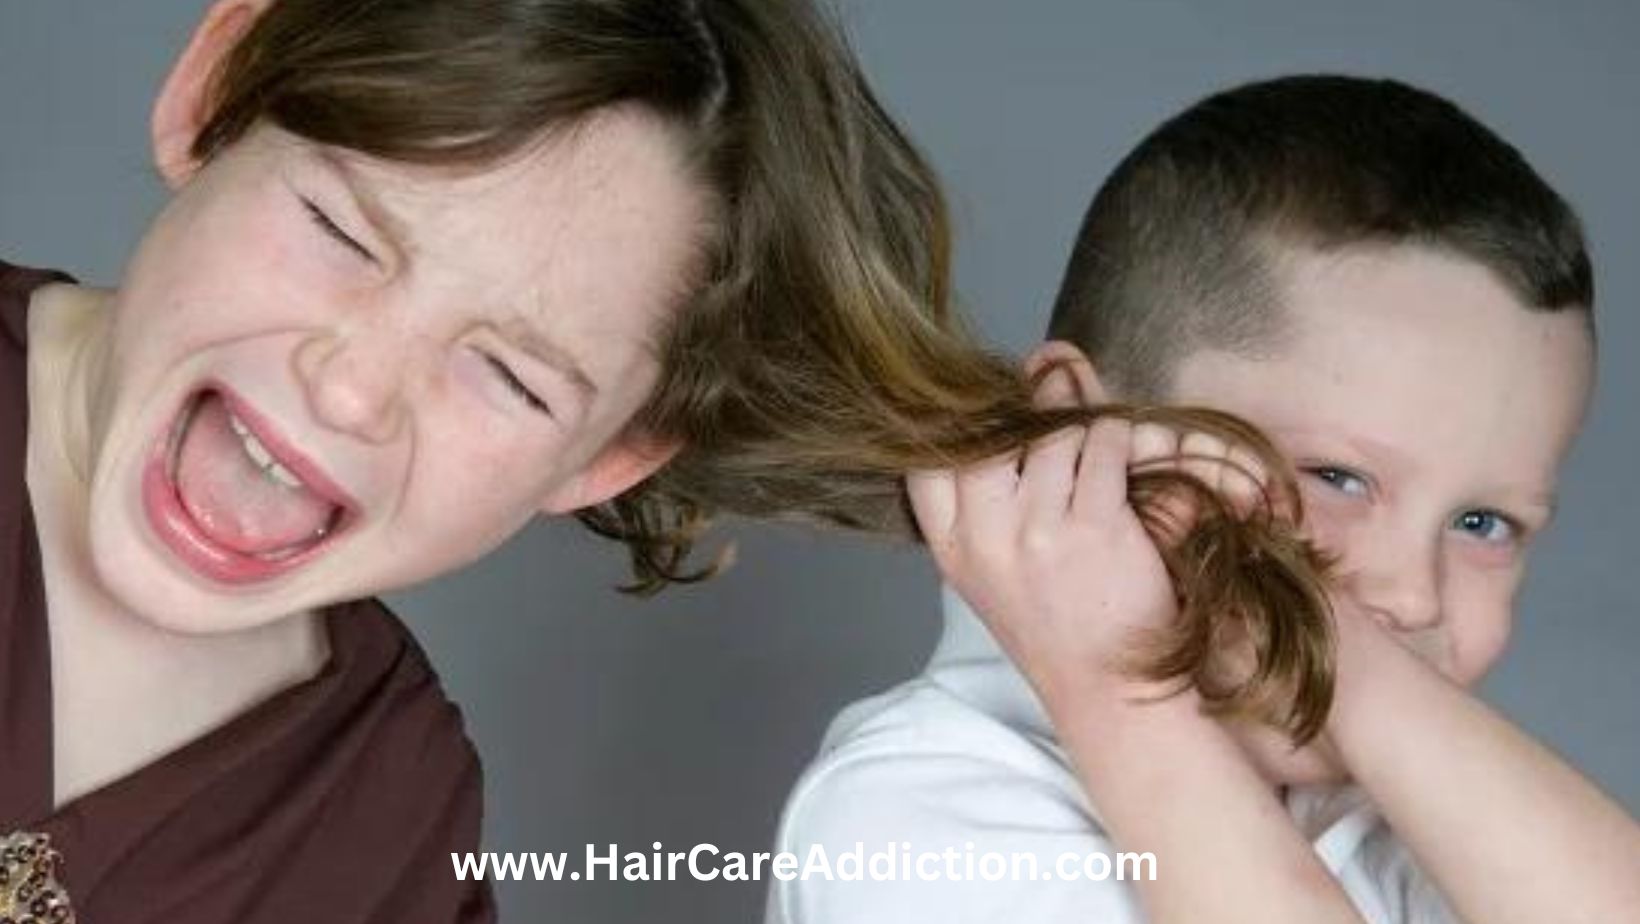 Is Pulling Child's Hair Illegal (Punishment)